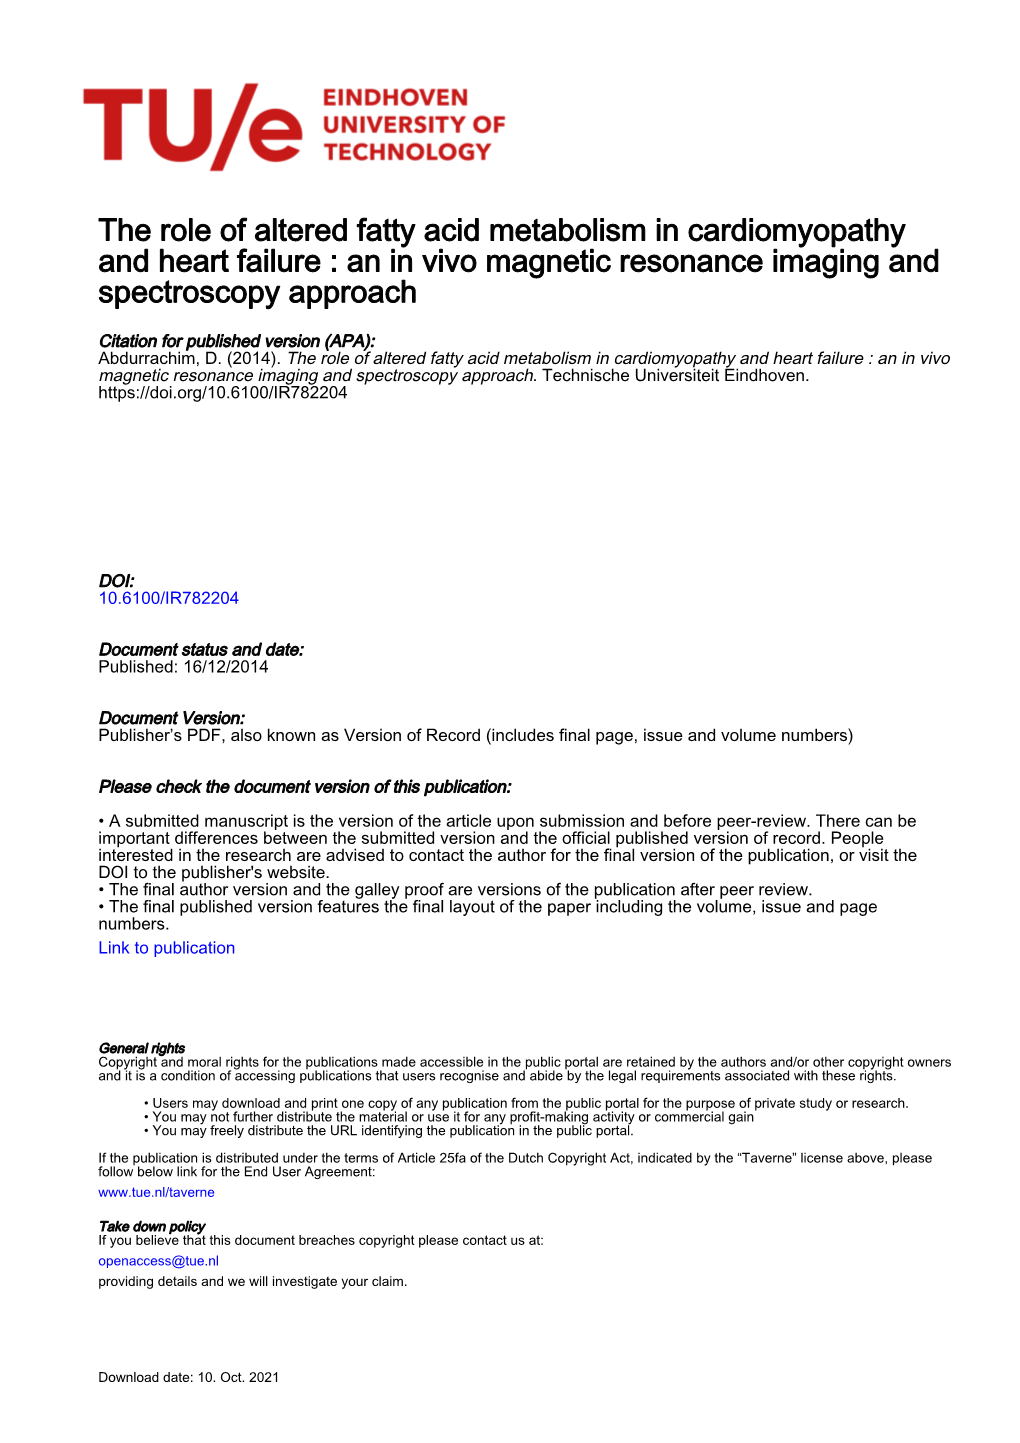 The Role of Altered Fatty Acid Metabolism in Cardiomyopathy and Heart Failure : an in Vivo Magnetic Resonance Imaging and Spectroscopy Approach